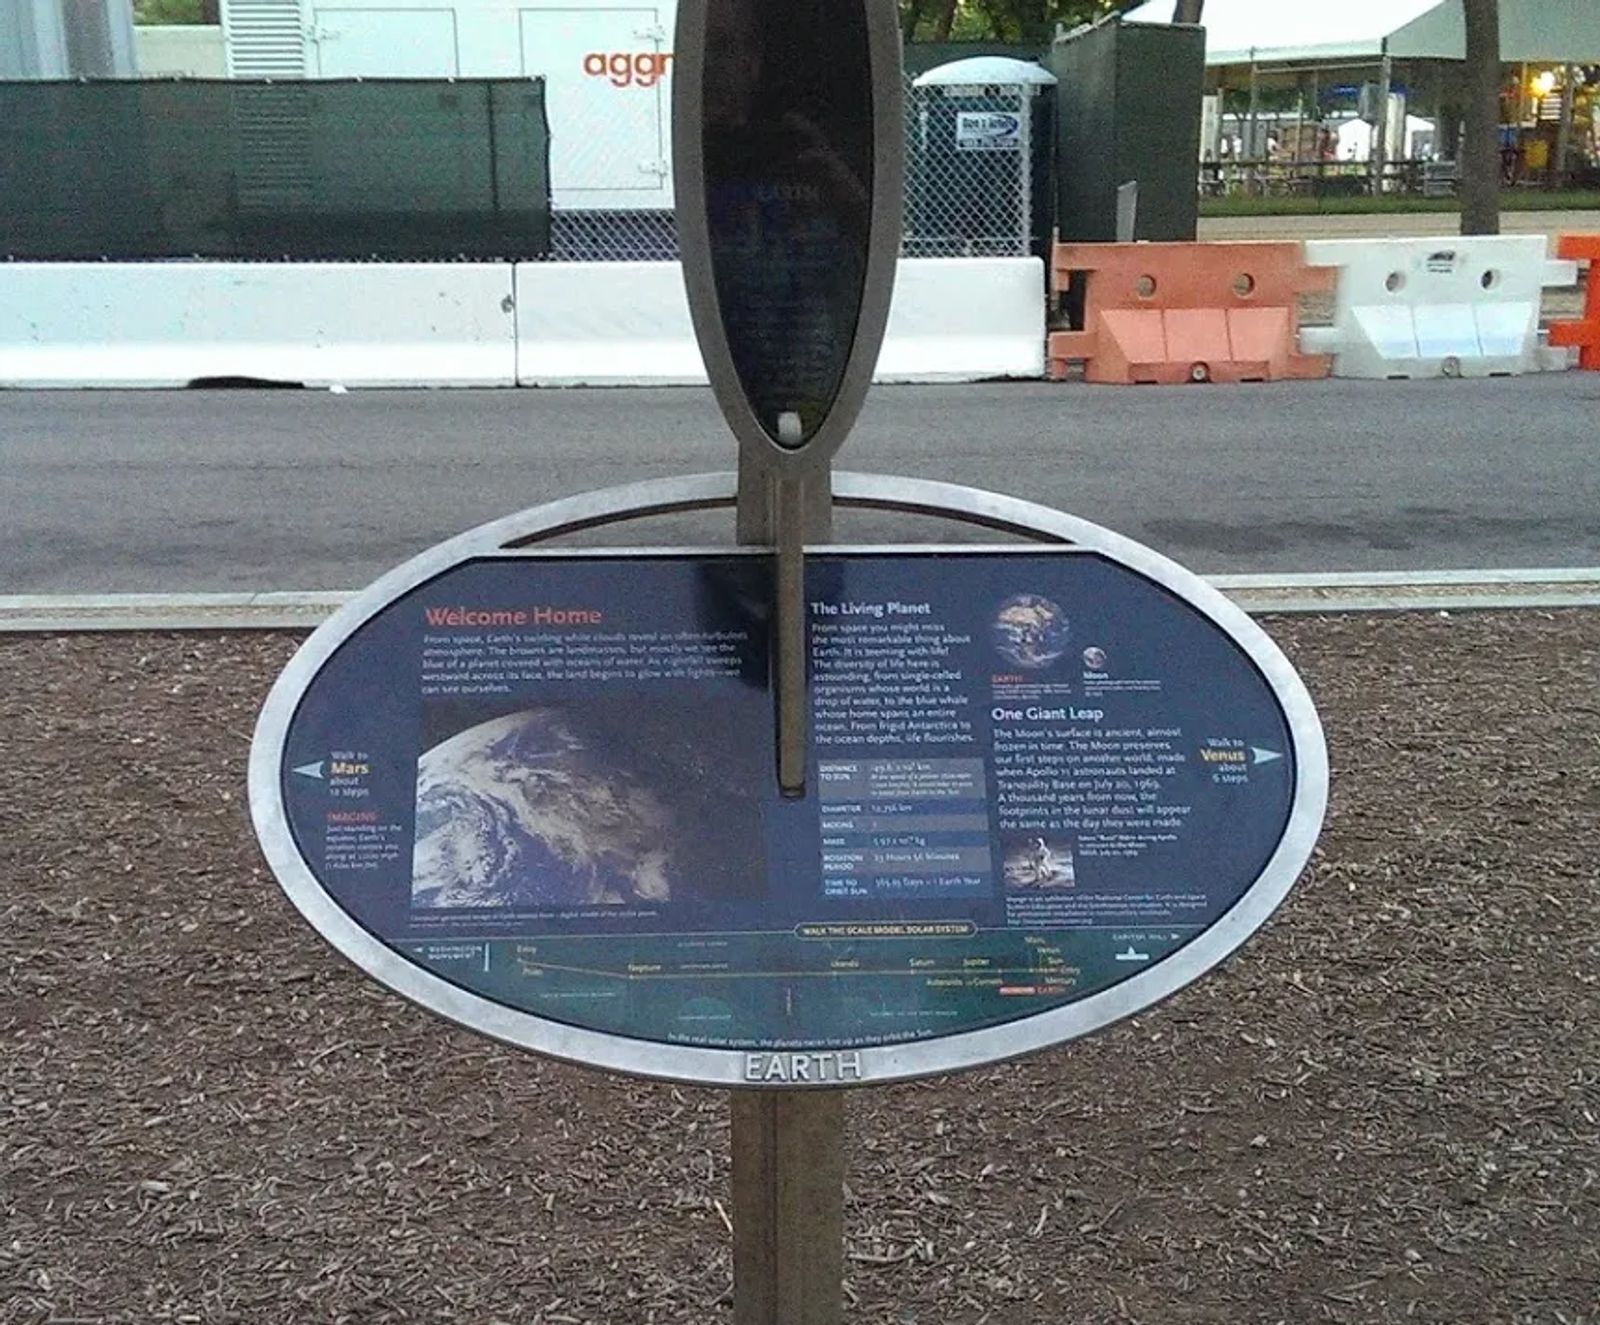 Photo of The "Earth" station of the solar system model in Washington, DC